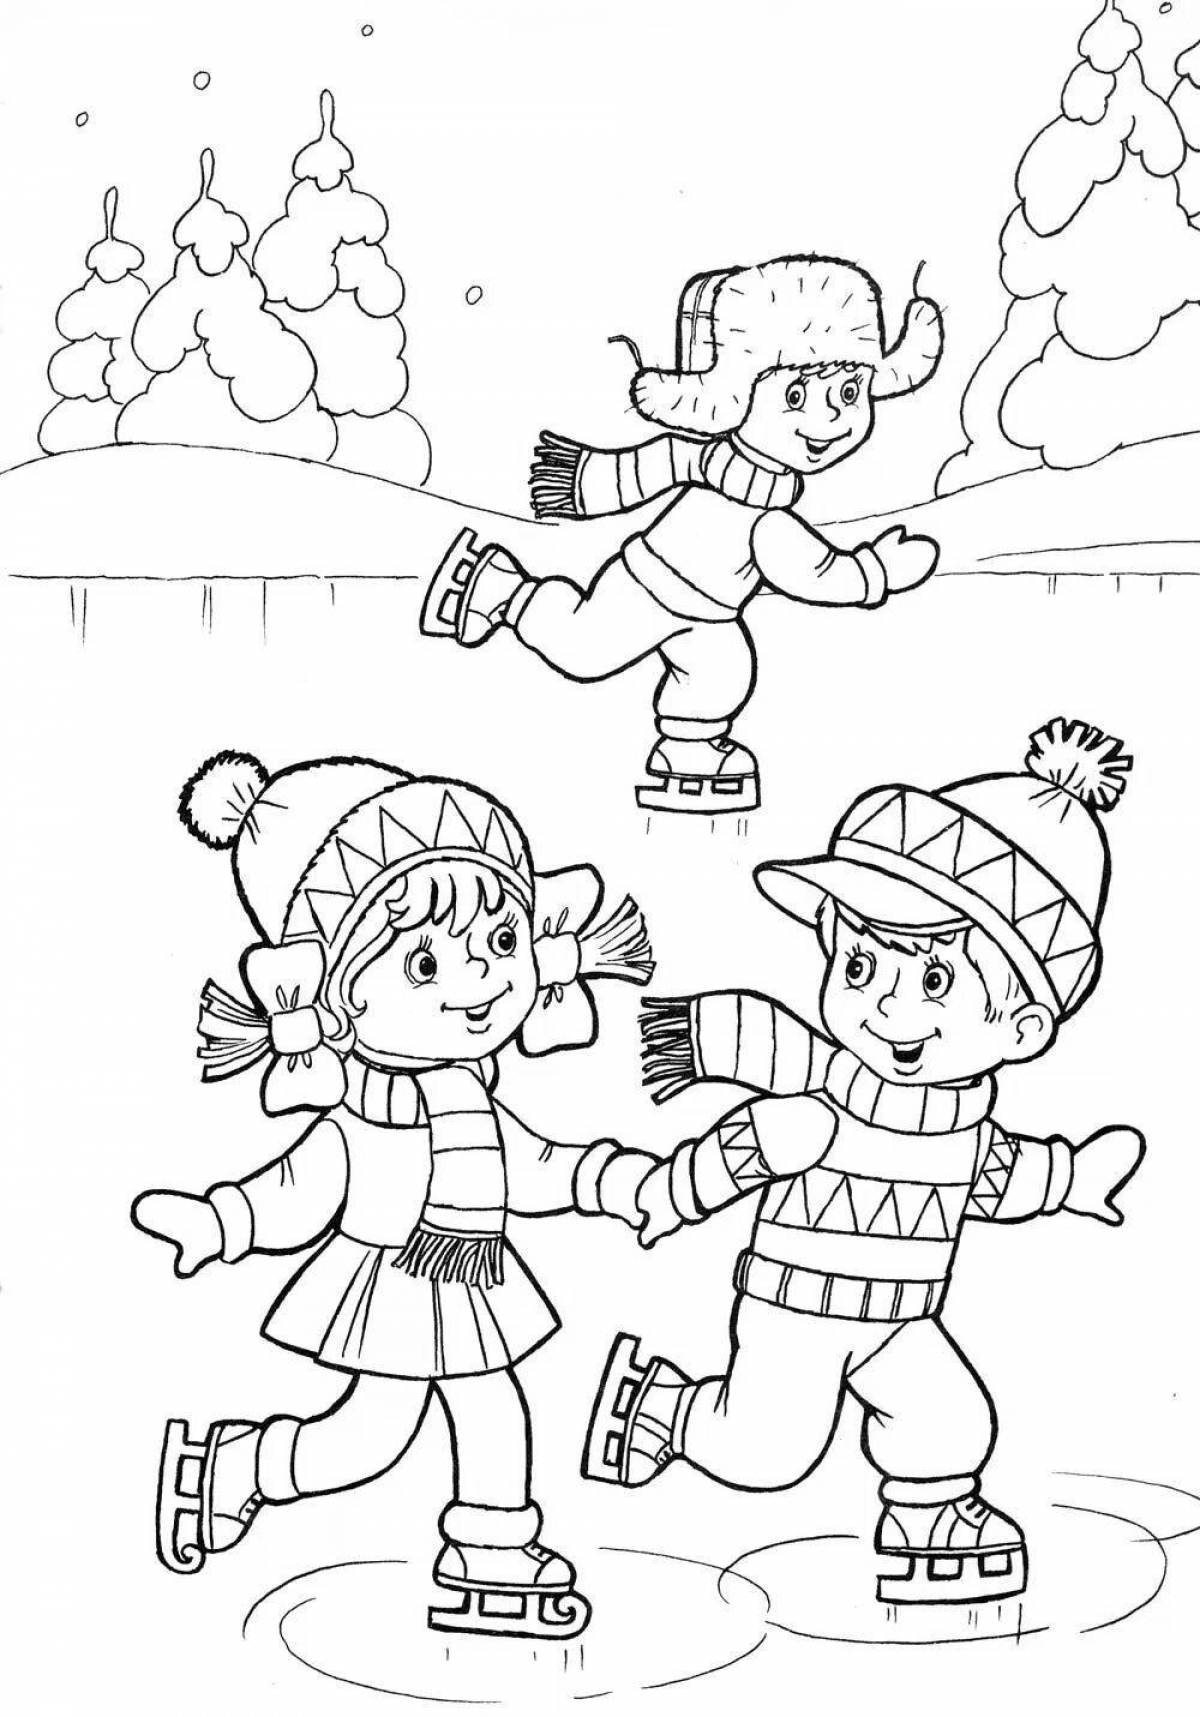 Funny winter drawing